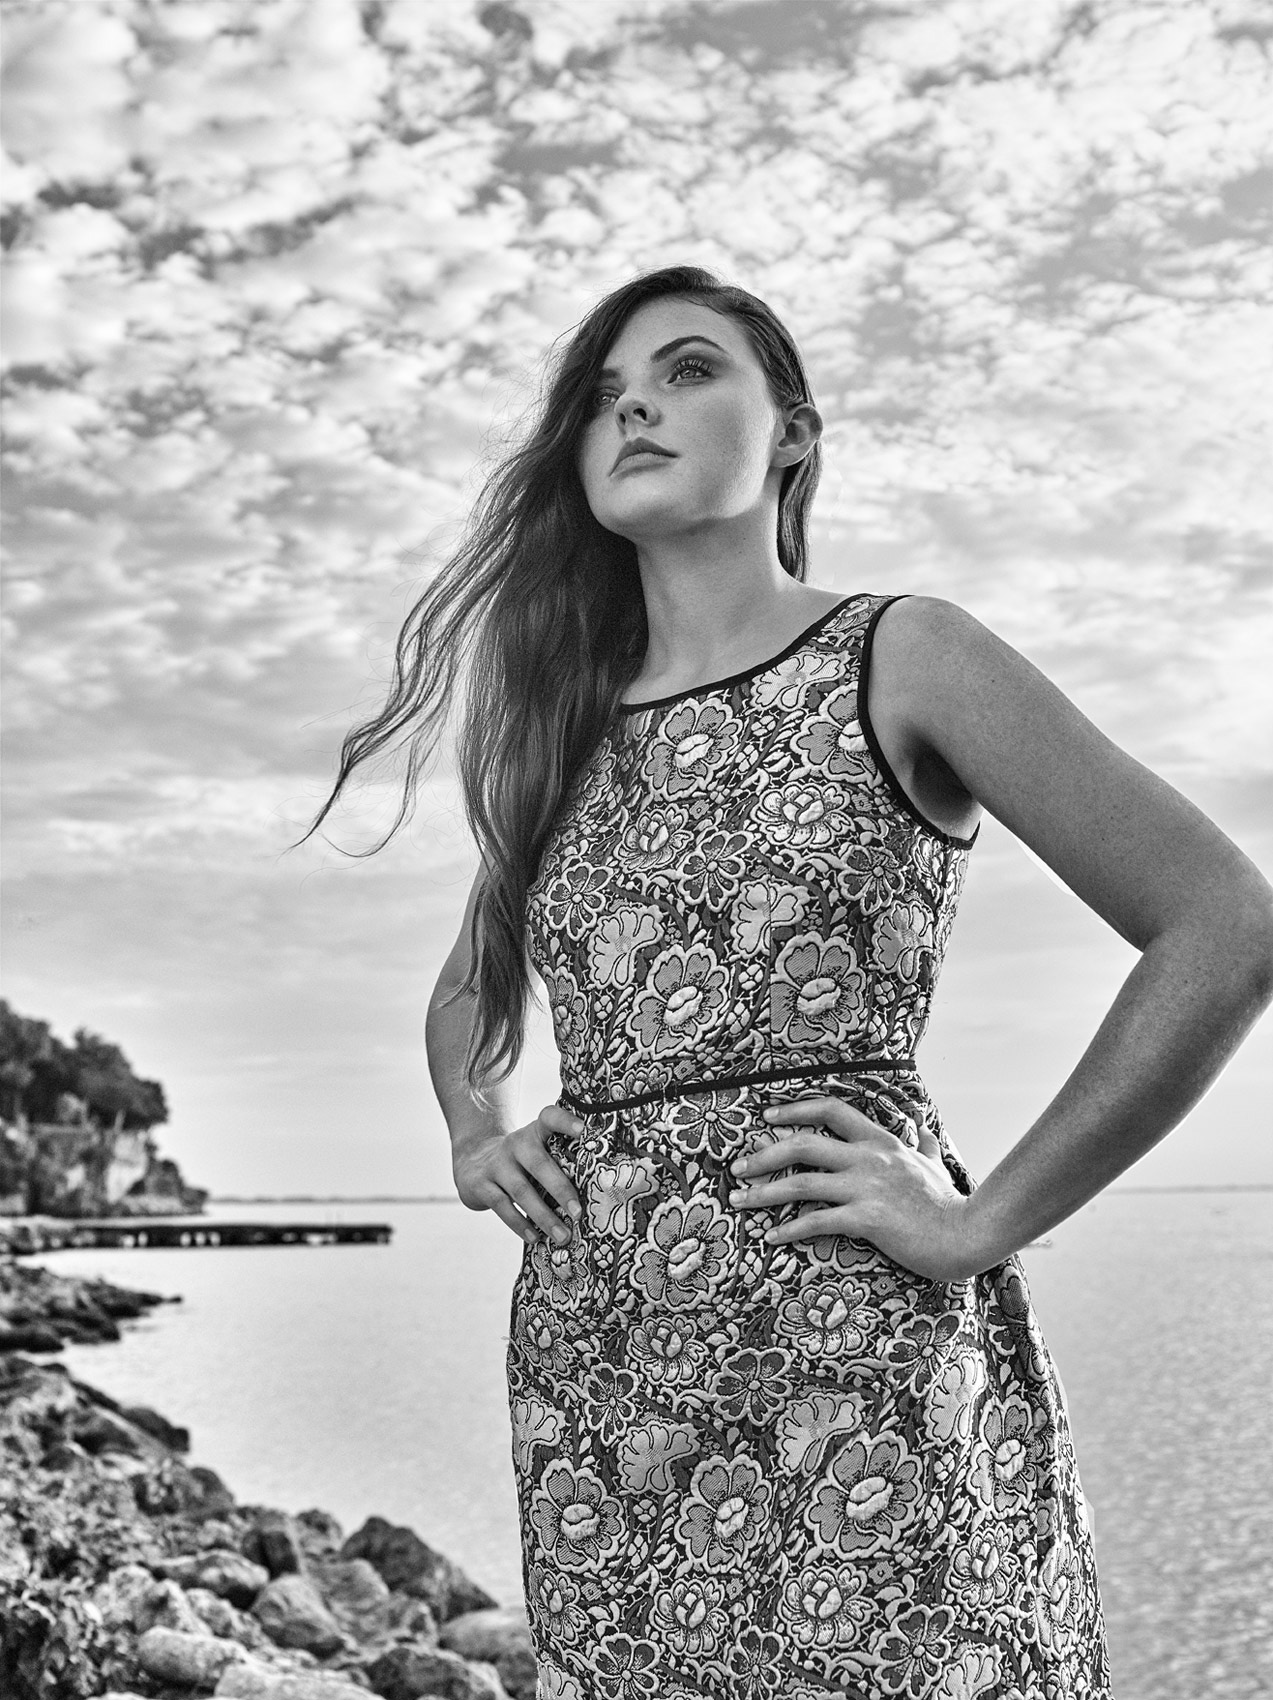 CASTAWAY_Model Elizabeth In Dress Arms Angled Holding Hands On Hips Face Looking Up To Clouds At Catawba Island Country Club Lake In Background